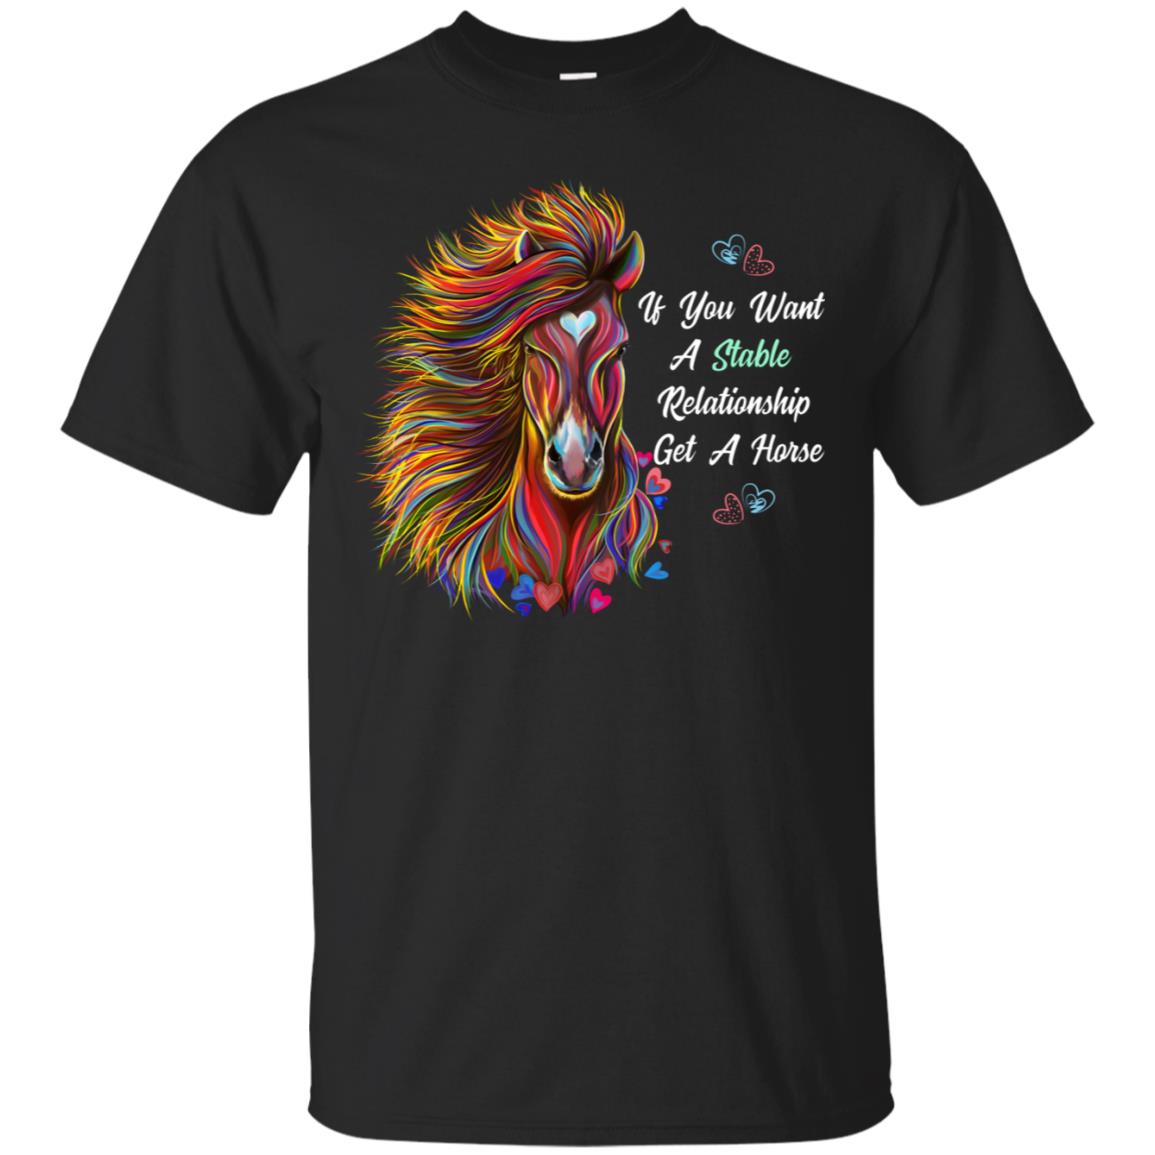 Horse T-shirt, Horse Gift - If You Want A Stable Relationship Get A Horse, Funny Shirt - GoneBold.gift